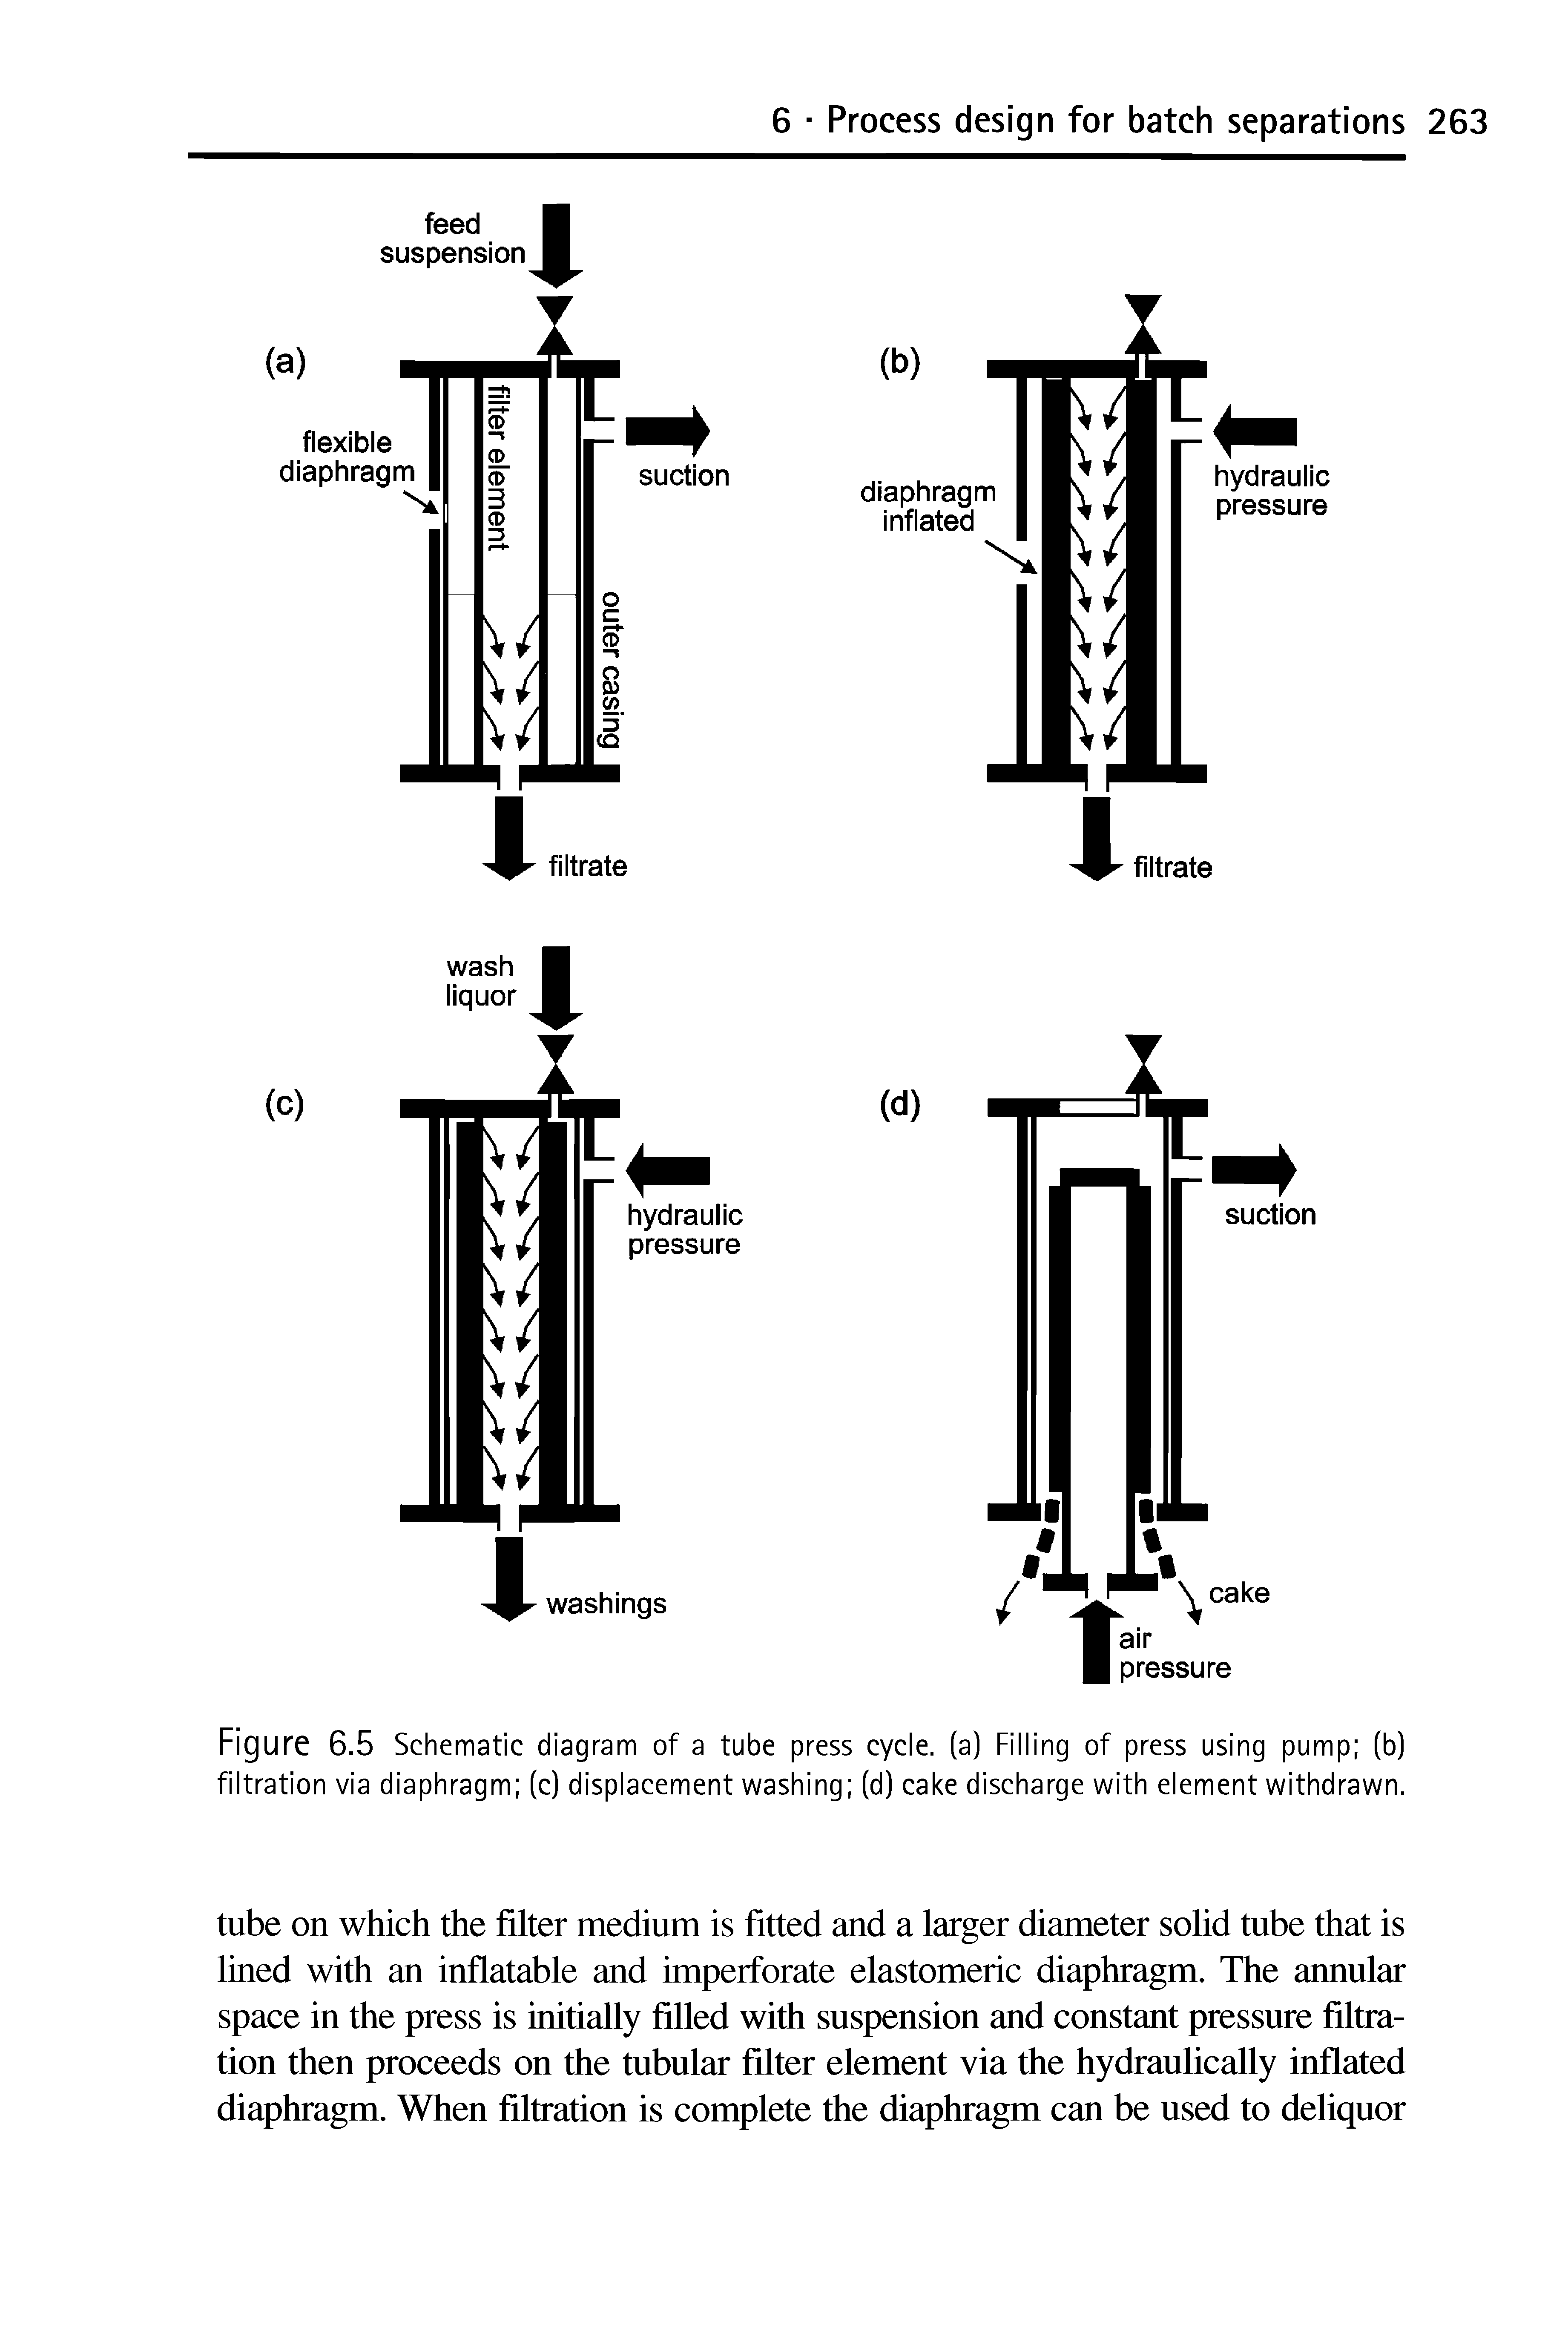 Figure 6.5 Schematic diagram of a tube press cycle, (a) Filling of press using pump (b) filtration via diaphragm (c) displacement washing (d) cake discharge with element withdrawn.